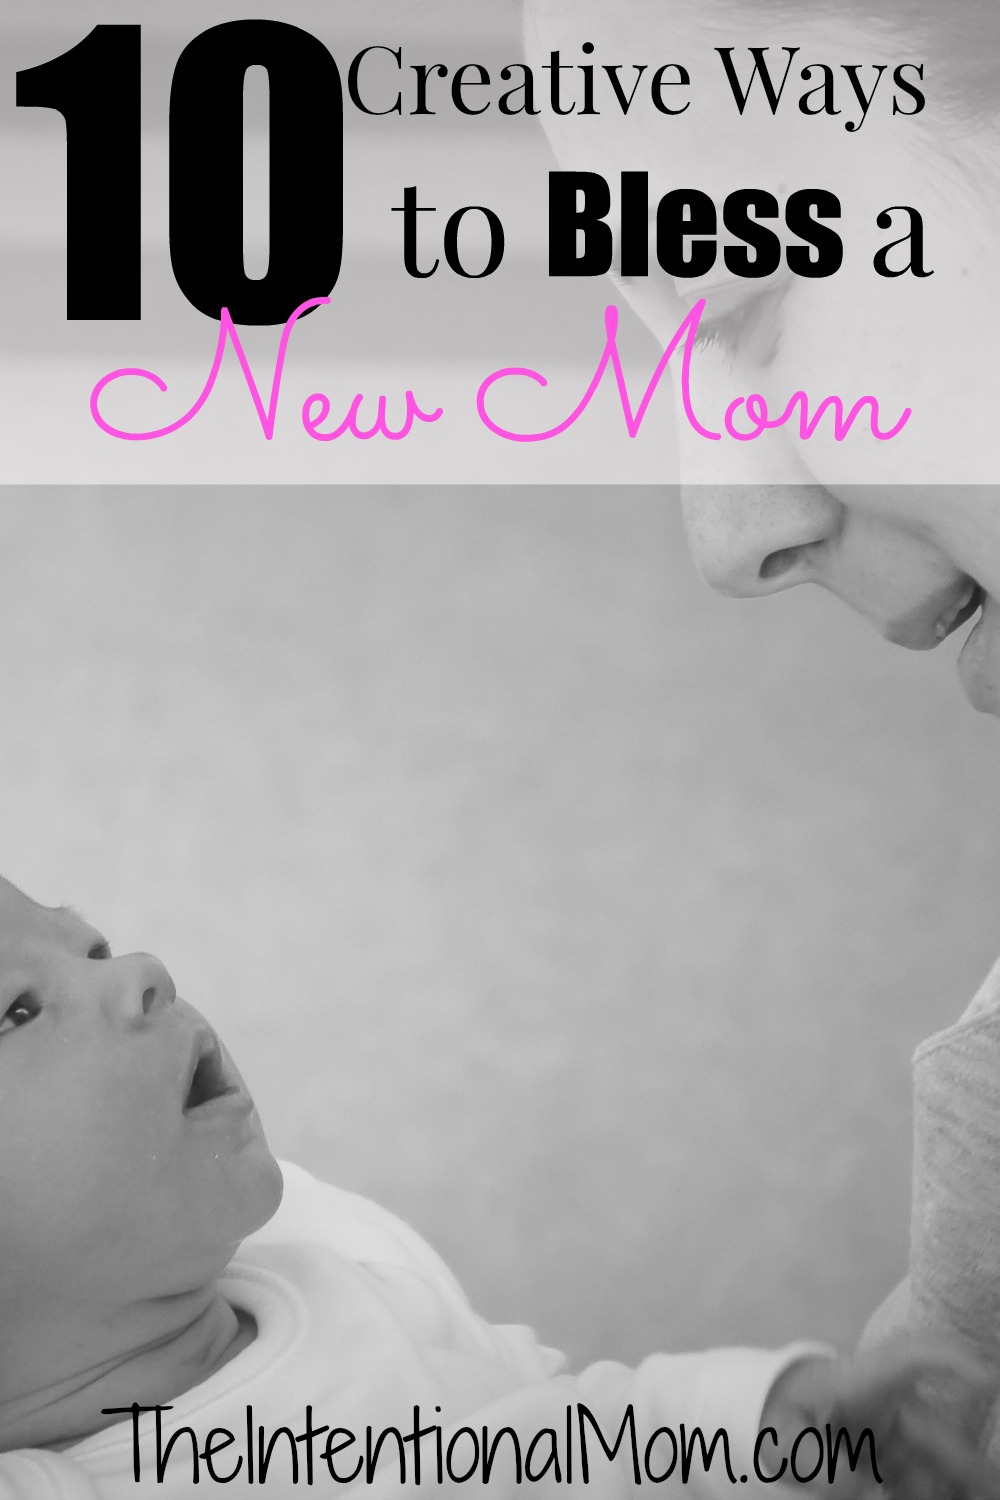 10 Creative Ways To Bless a New Mom